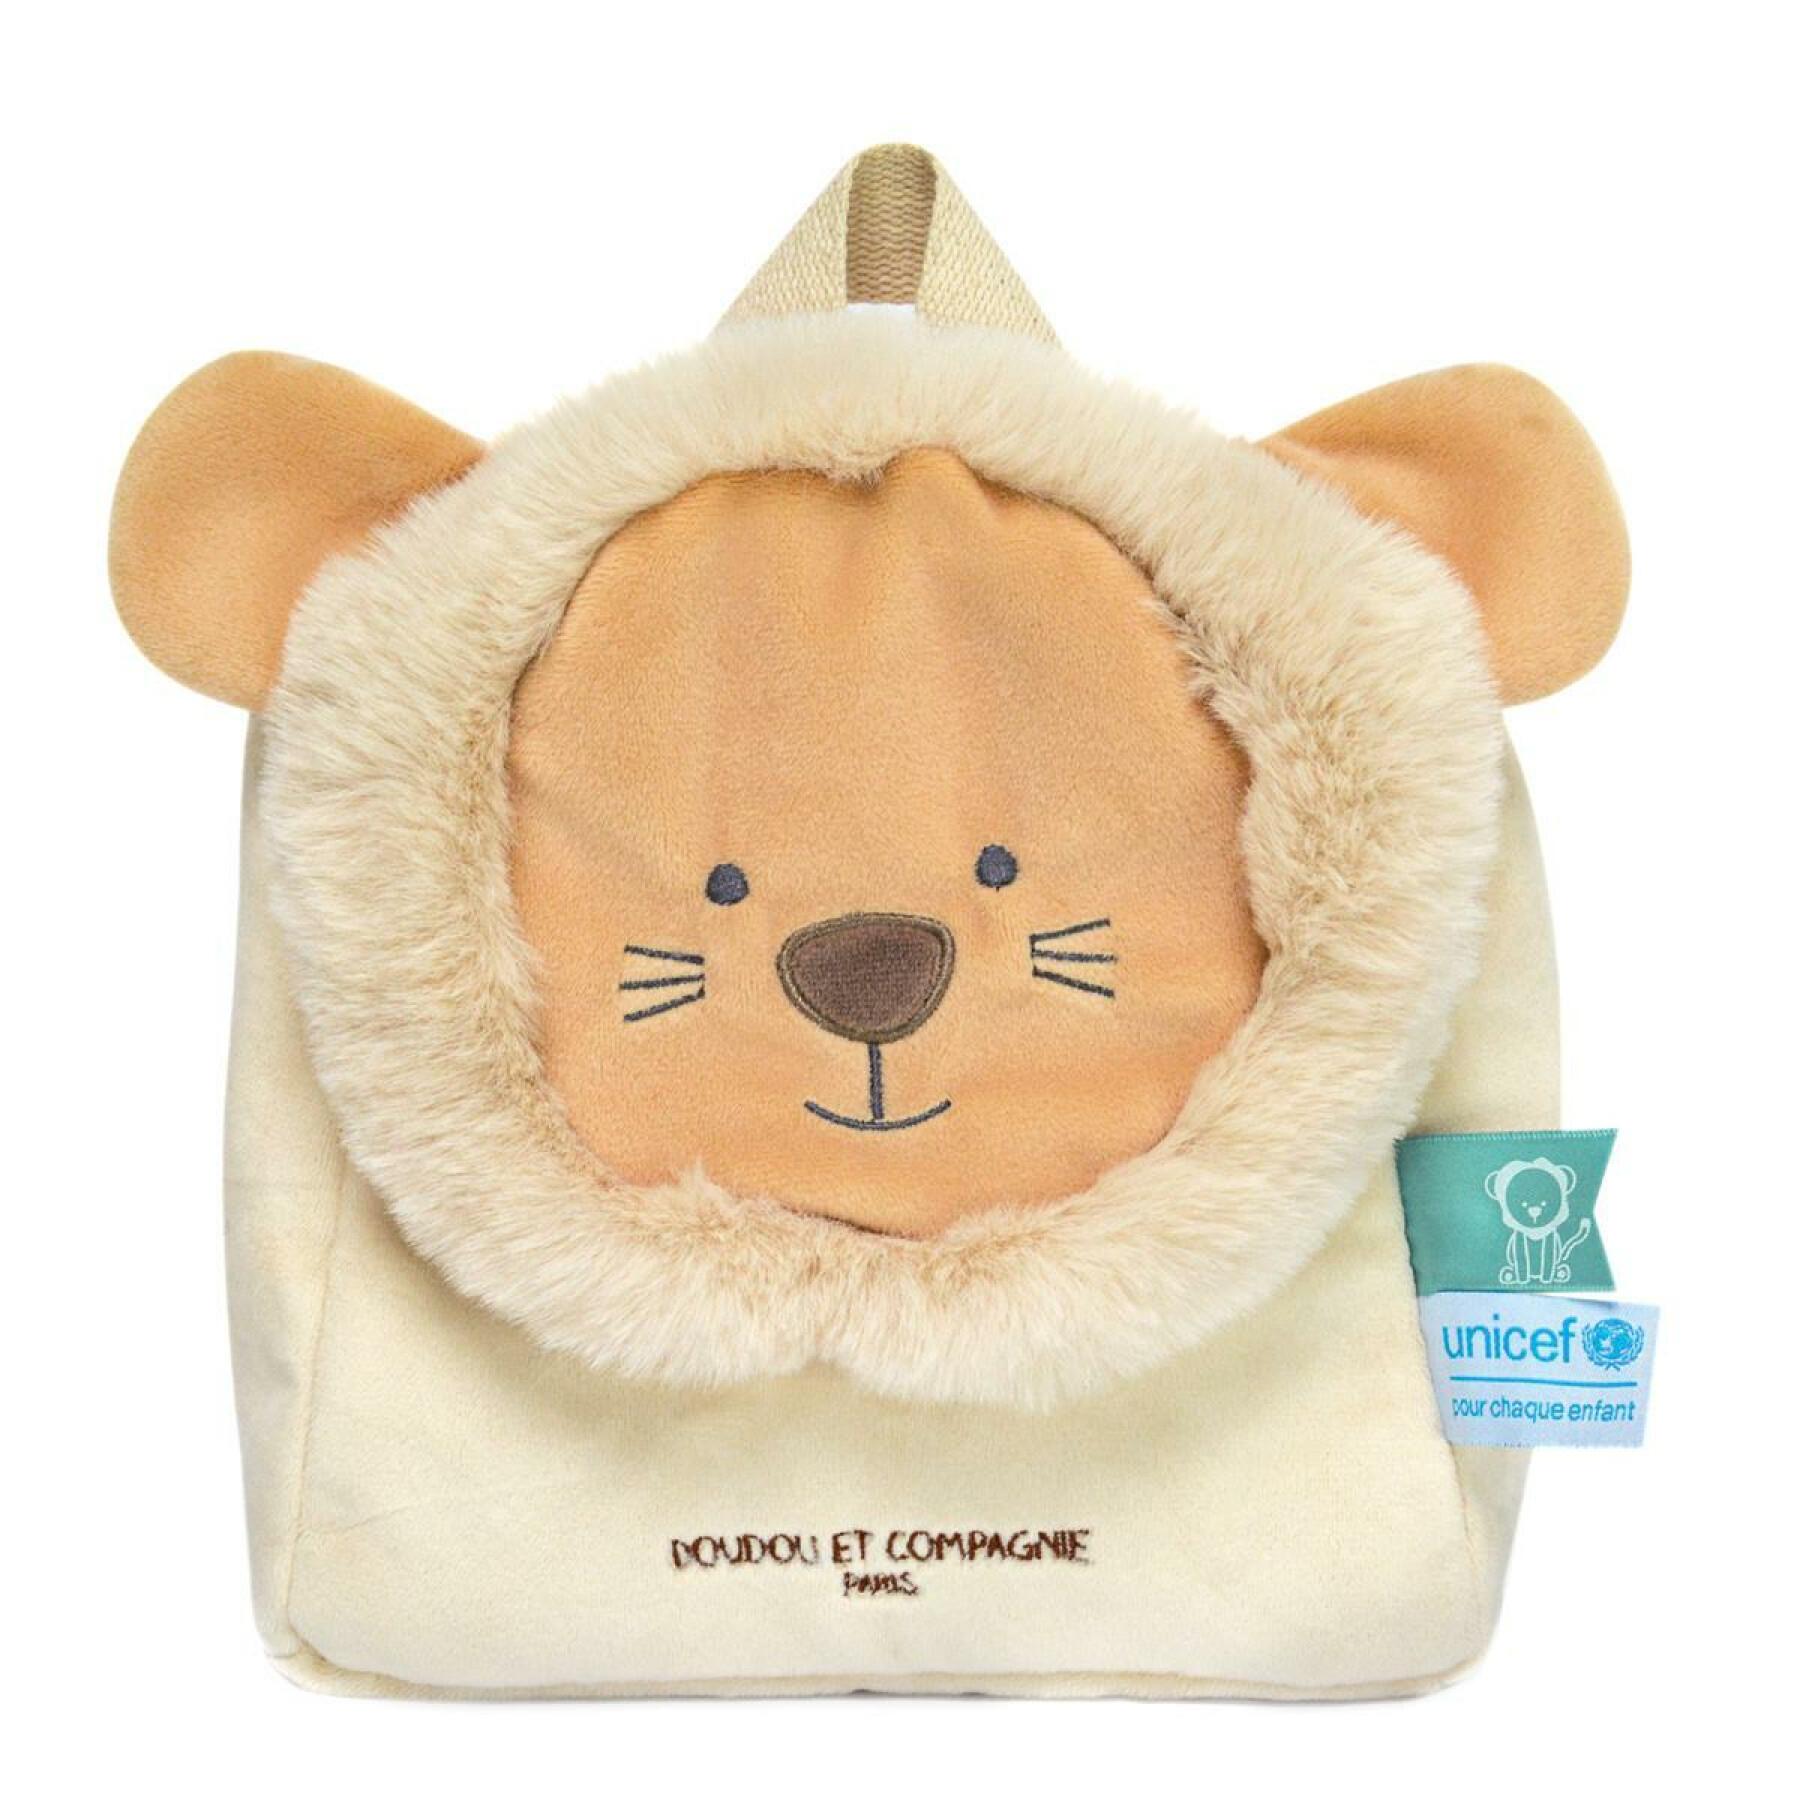 Children's backpack Doudou & compagnie Unicef - Lion